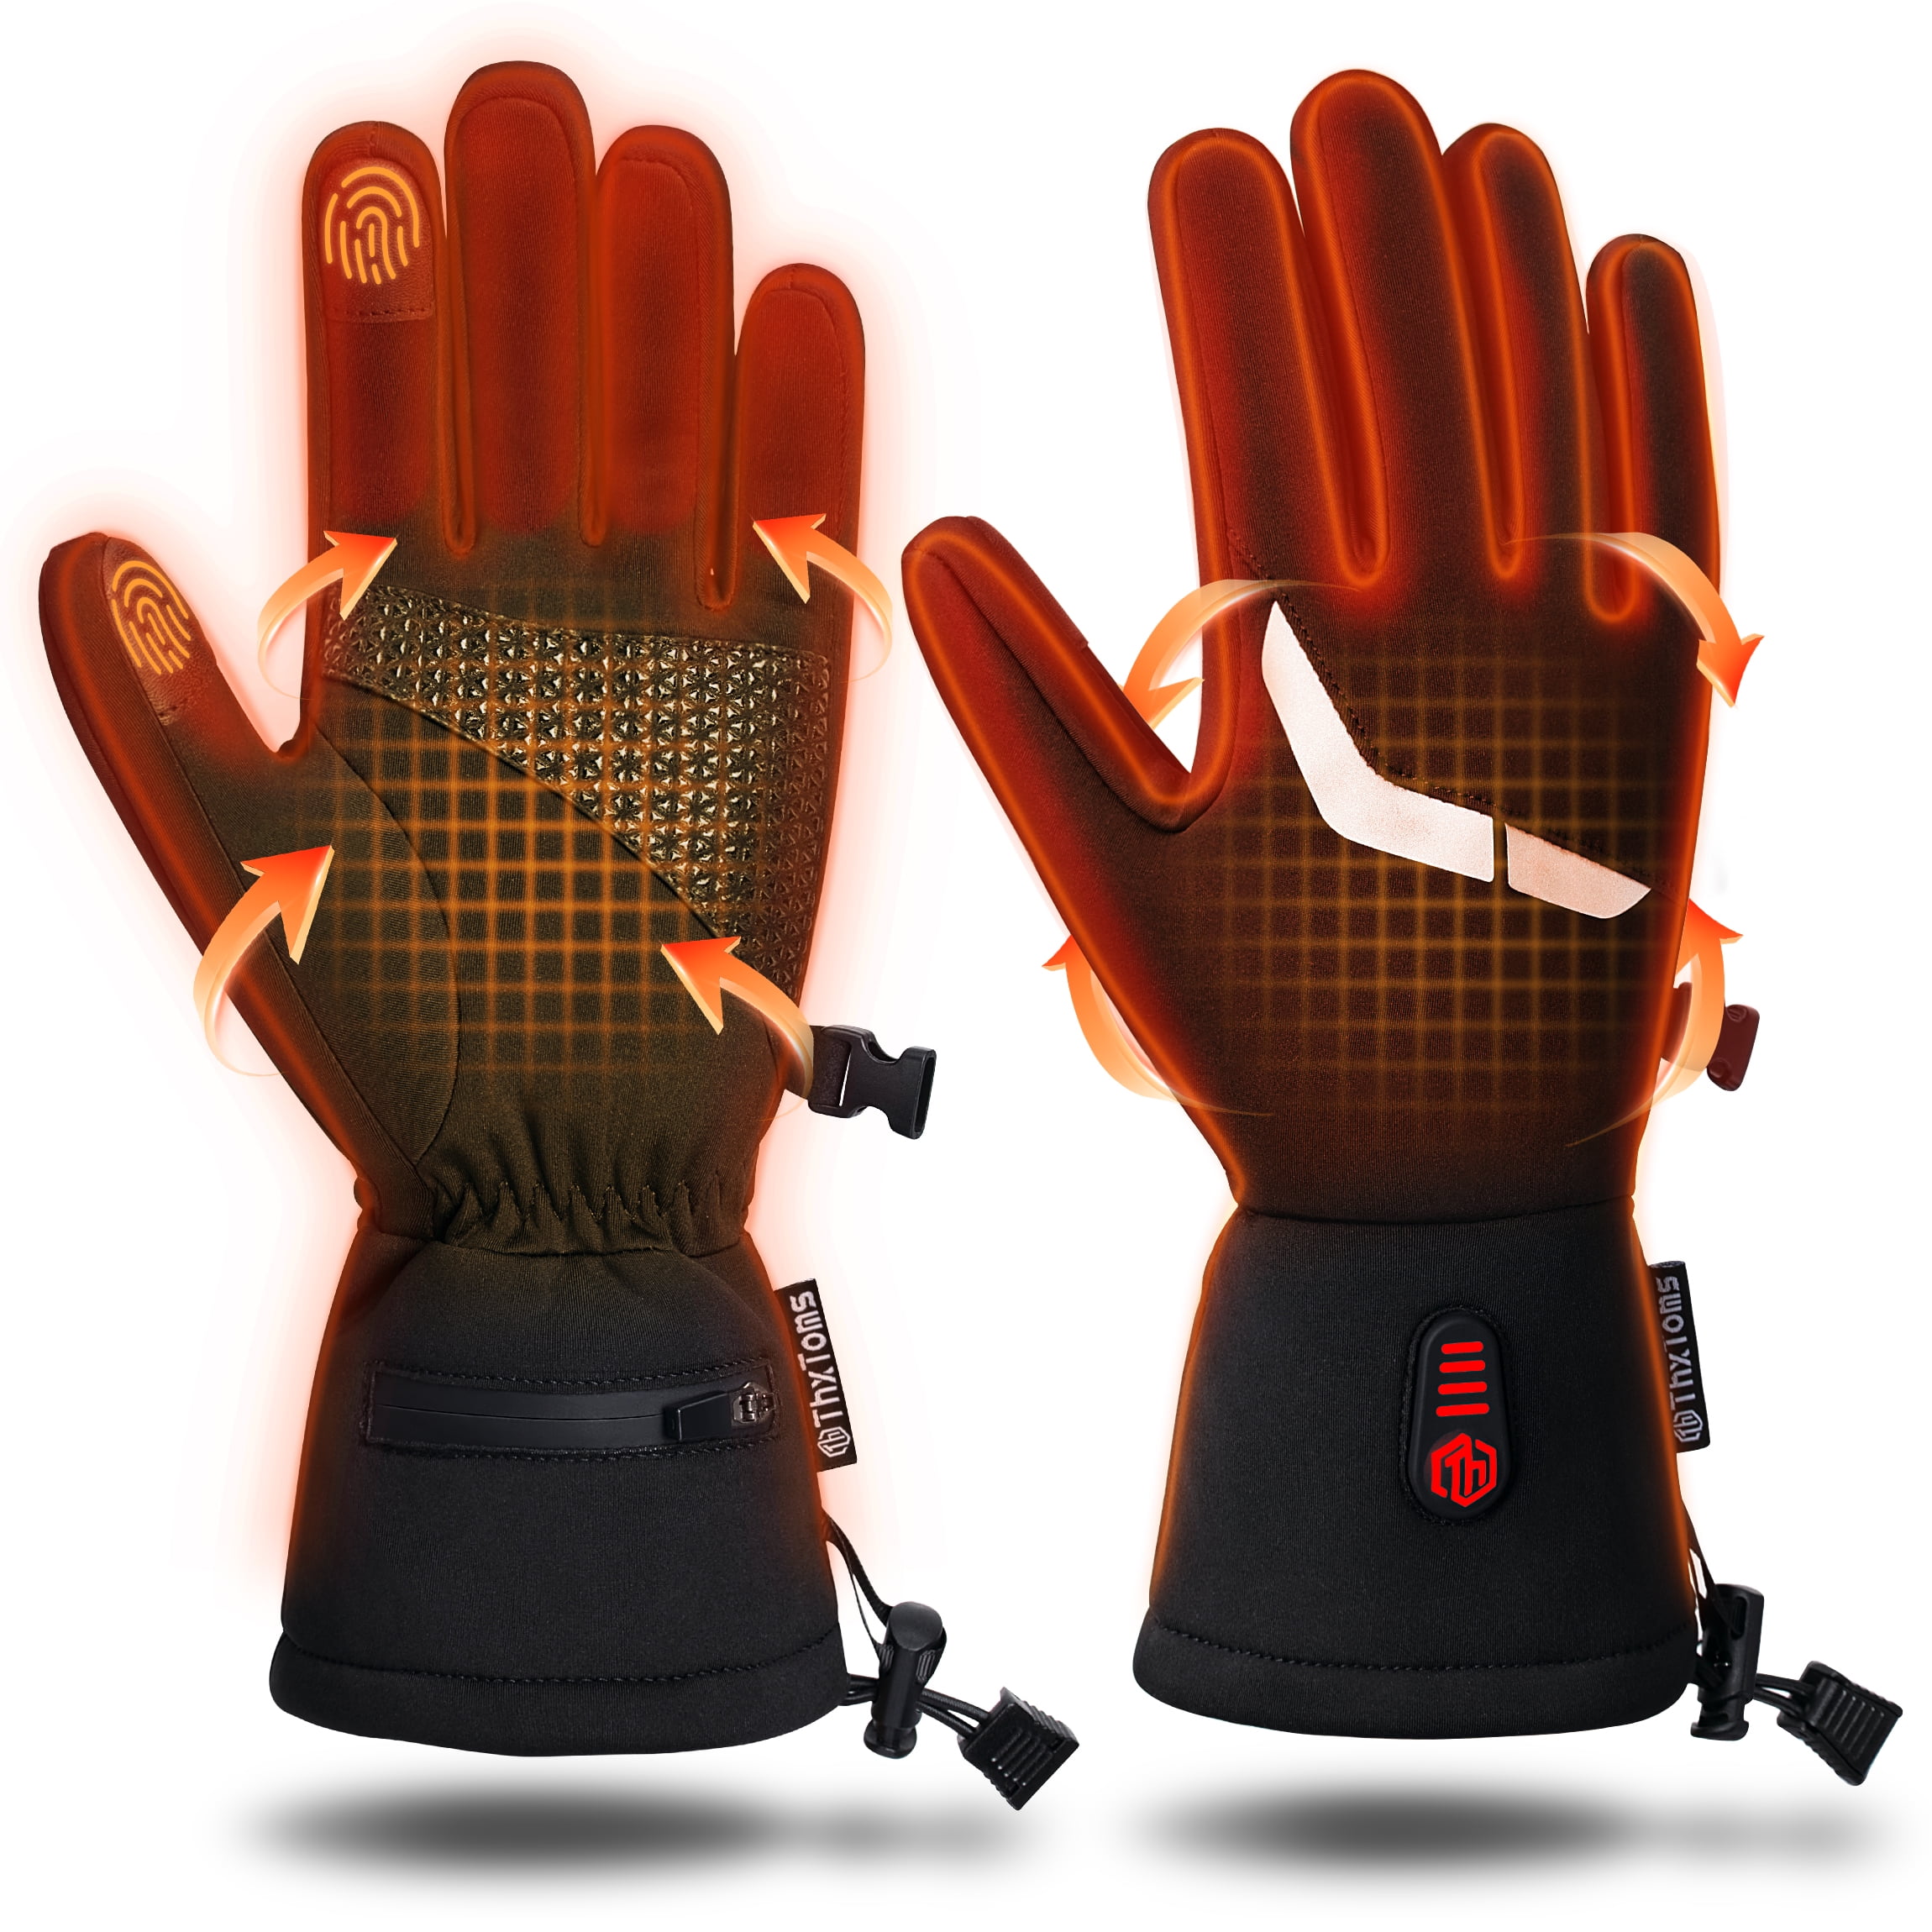 Gloves with heating